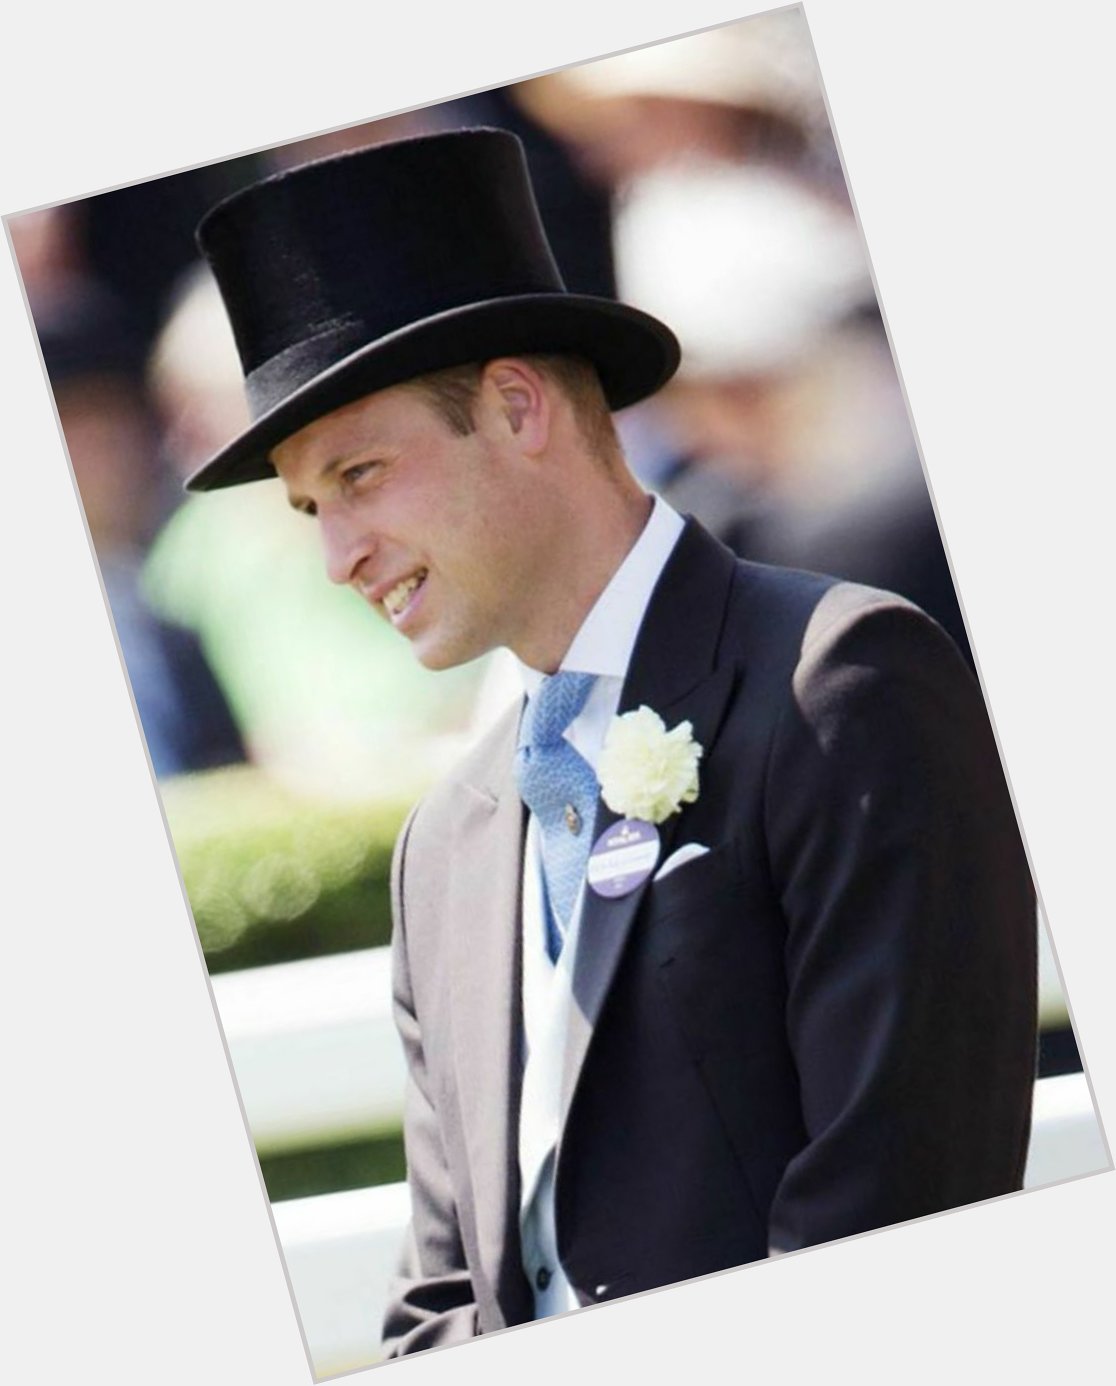 Happy birthday to the charming Prince William  